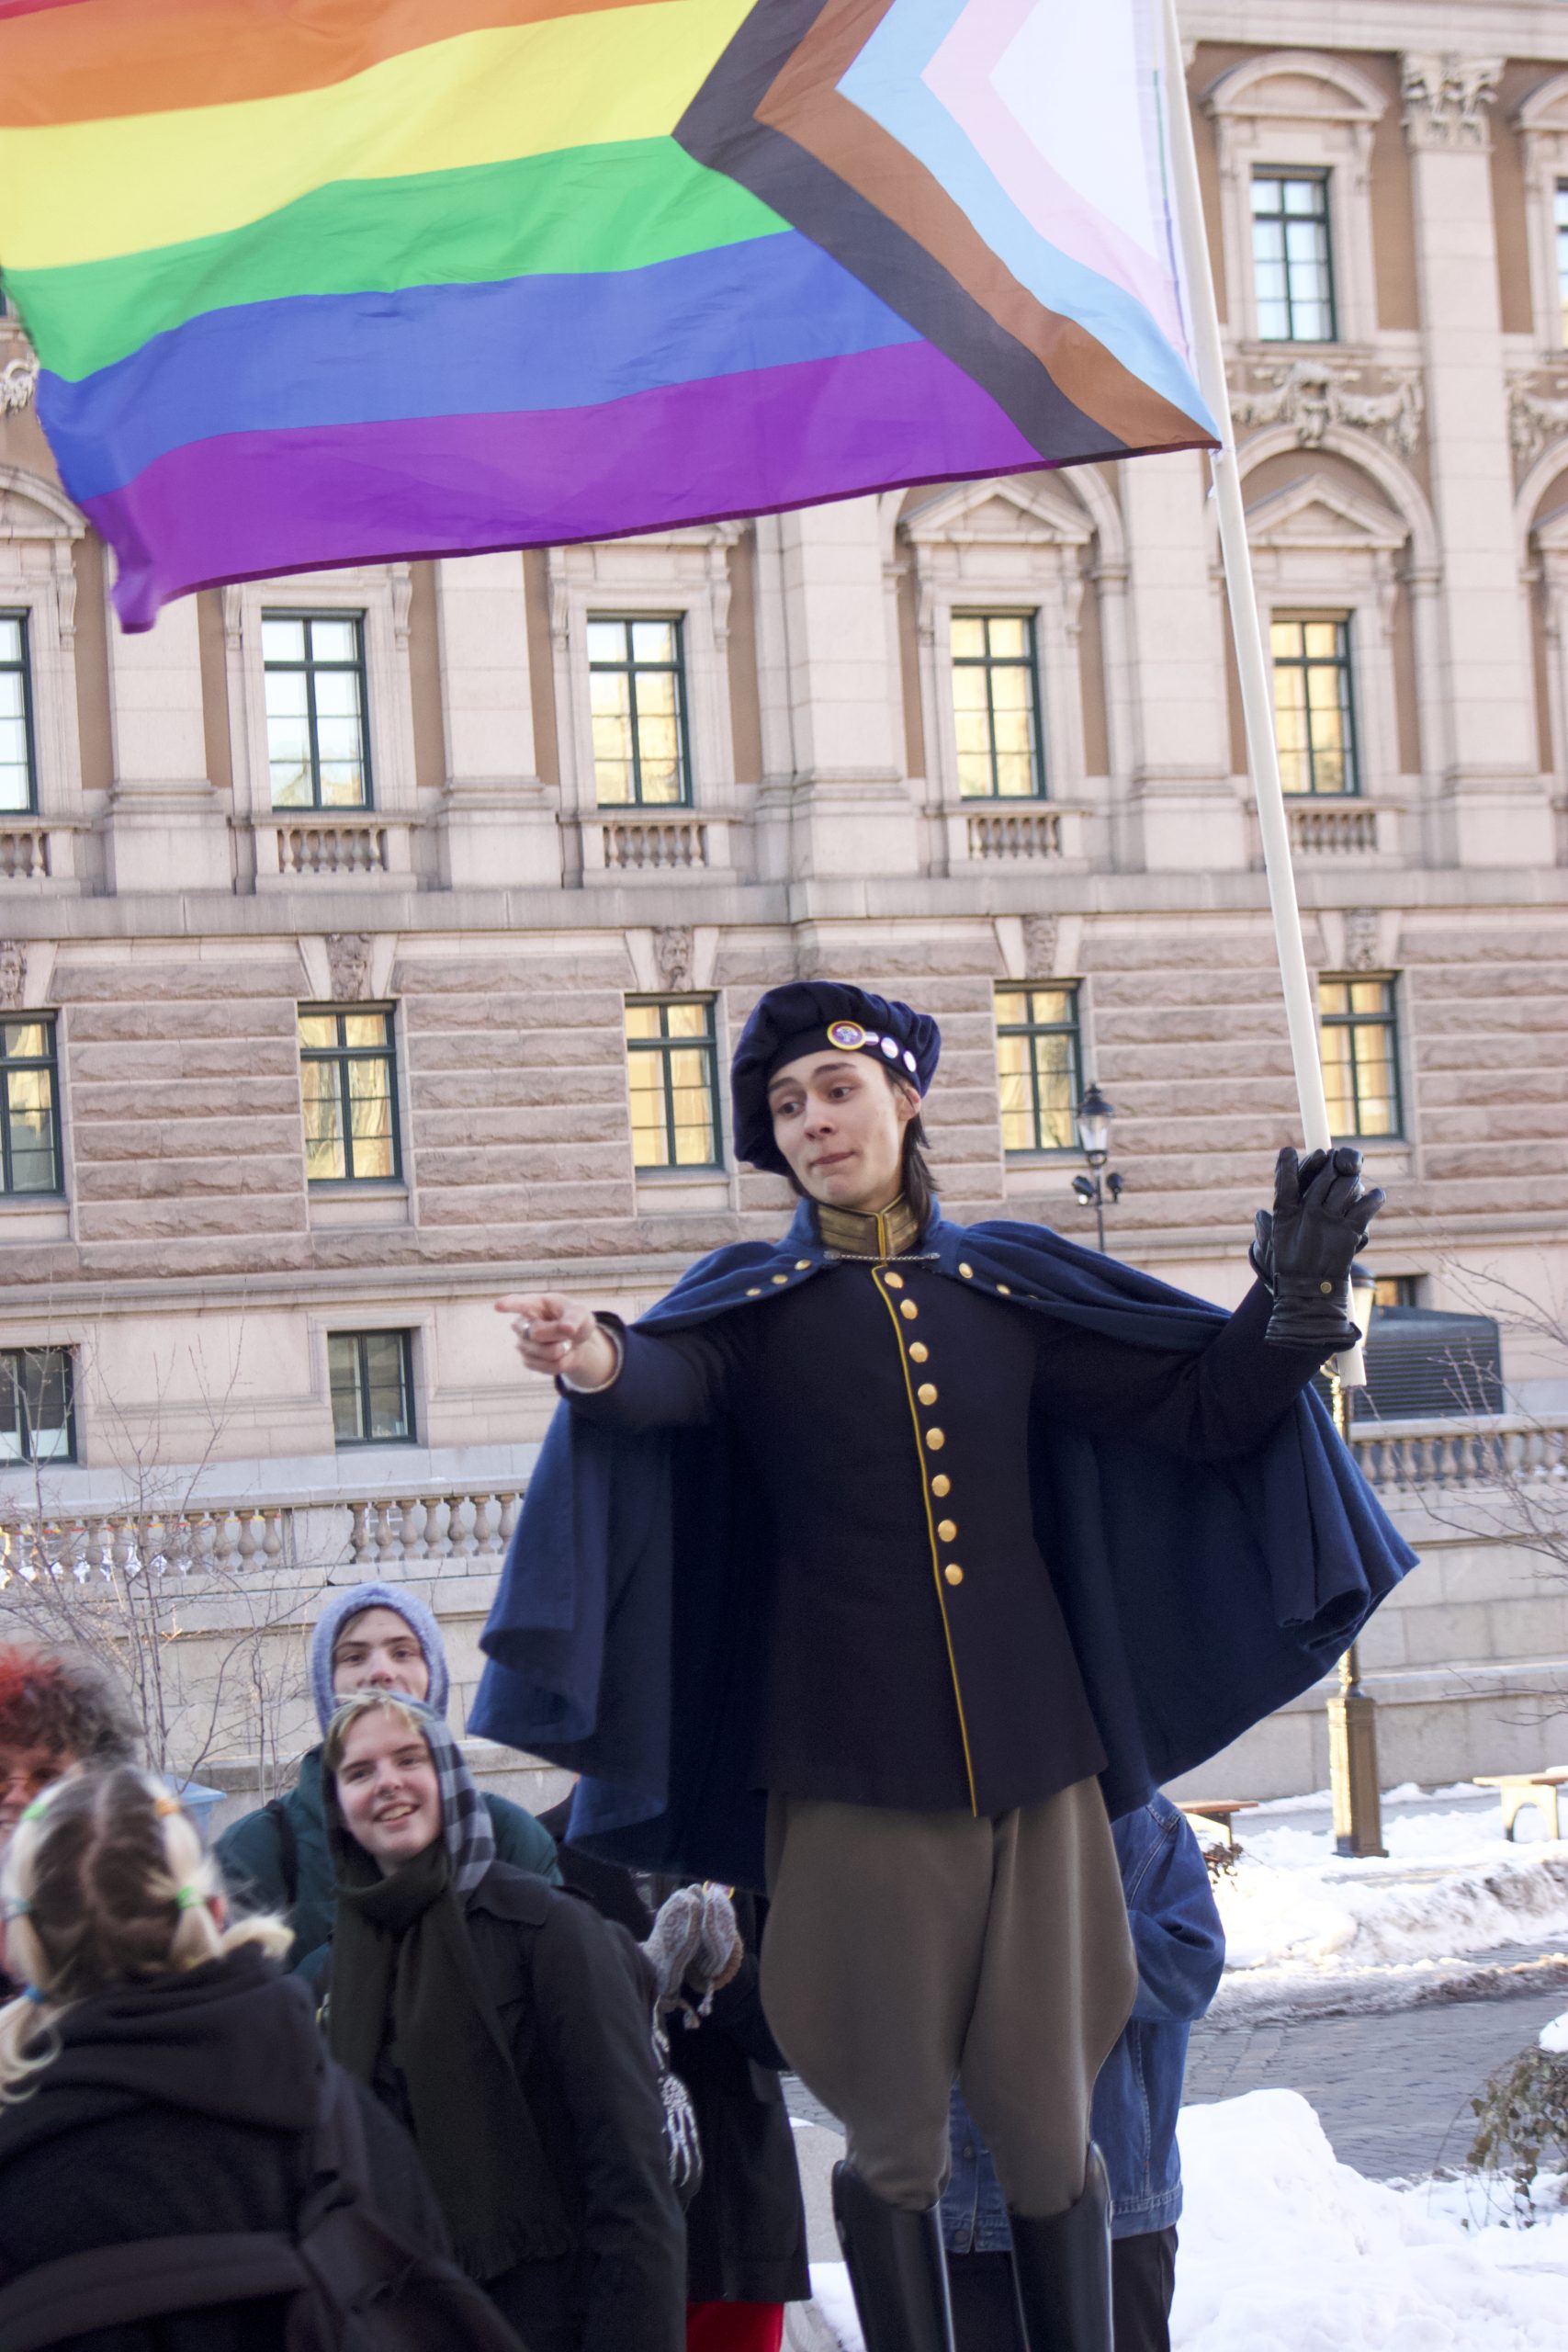 Photography of a person giving a speech and raising the progress pride flag.